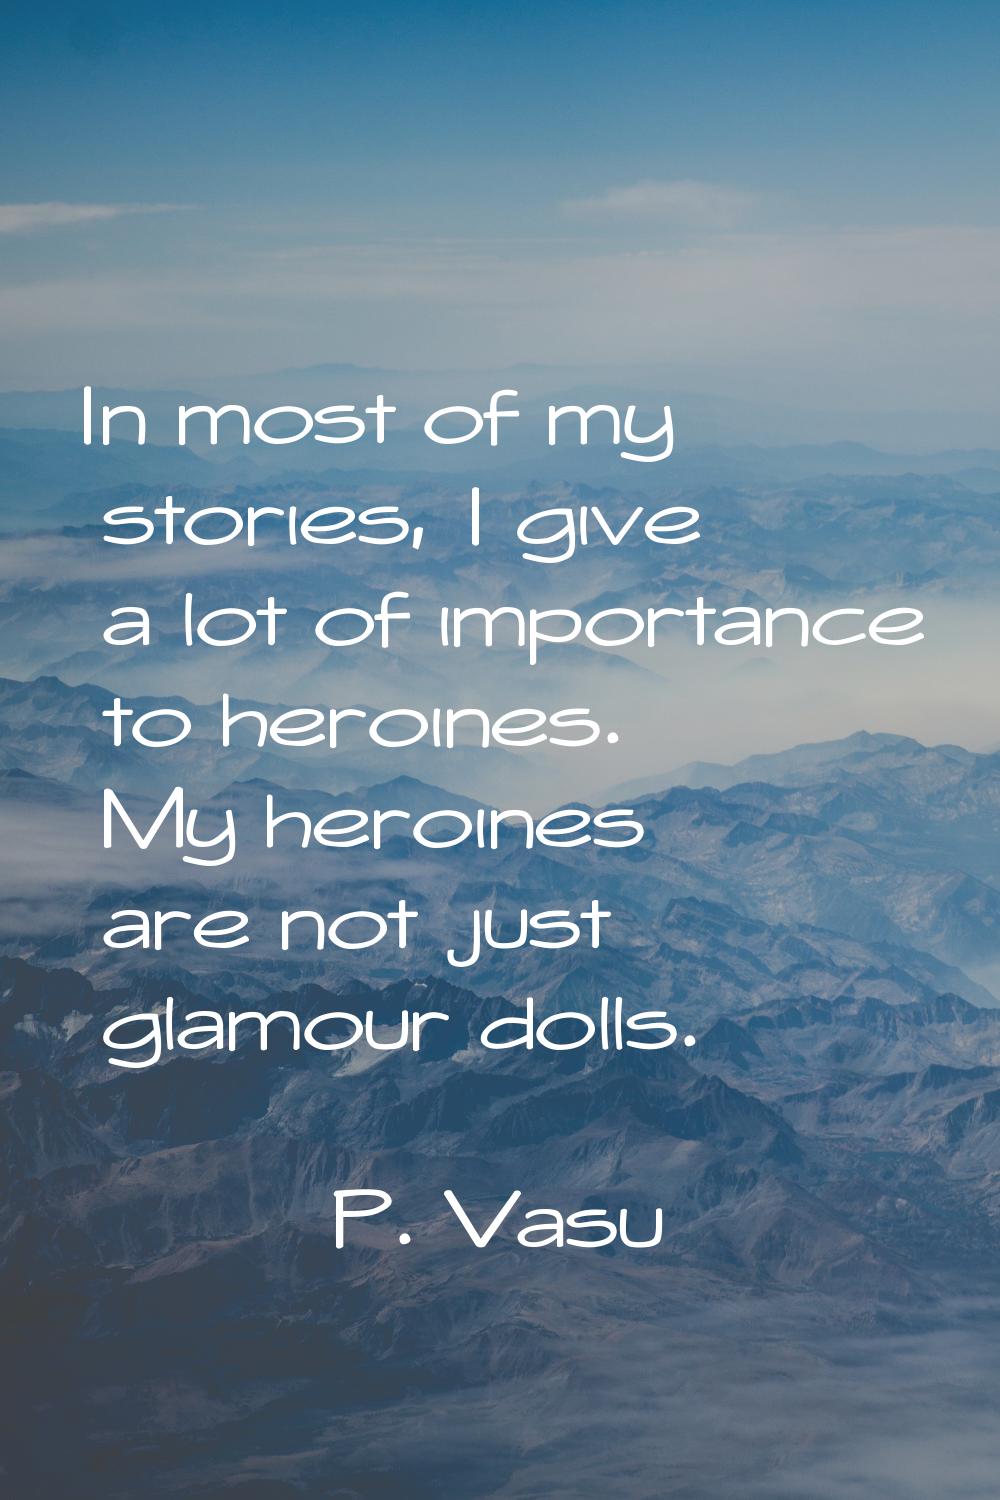 In most of my stories, I give a lot of importance to heroines. My heroines are not just glamour dol